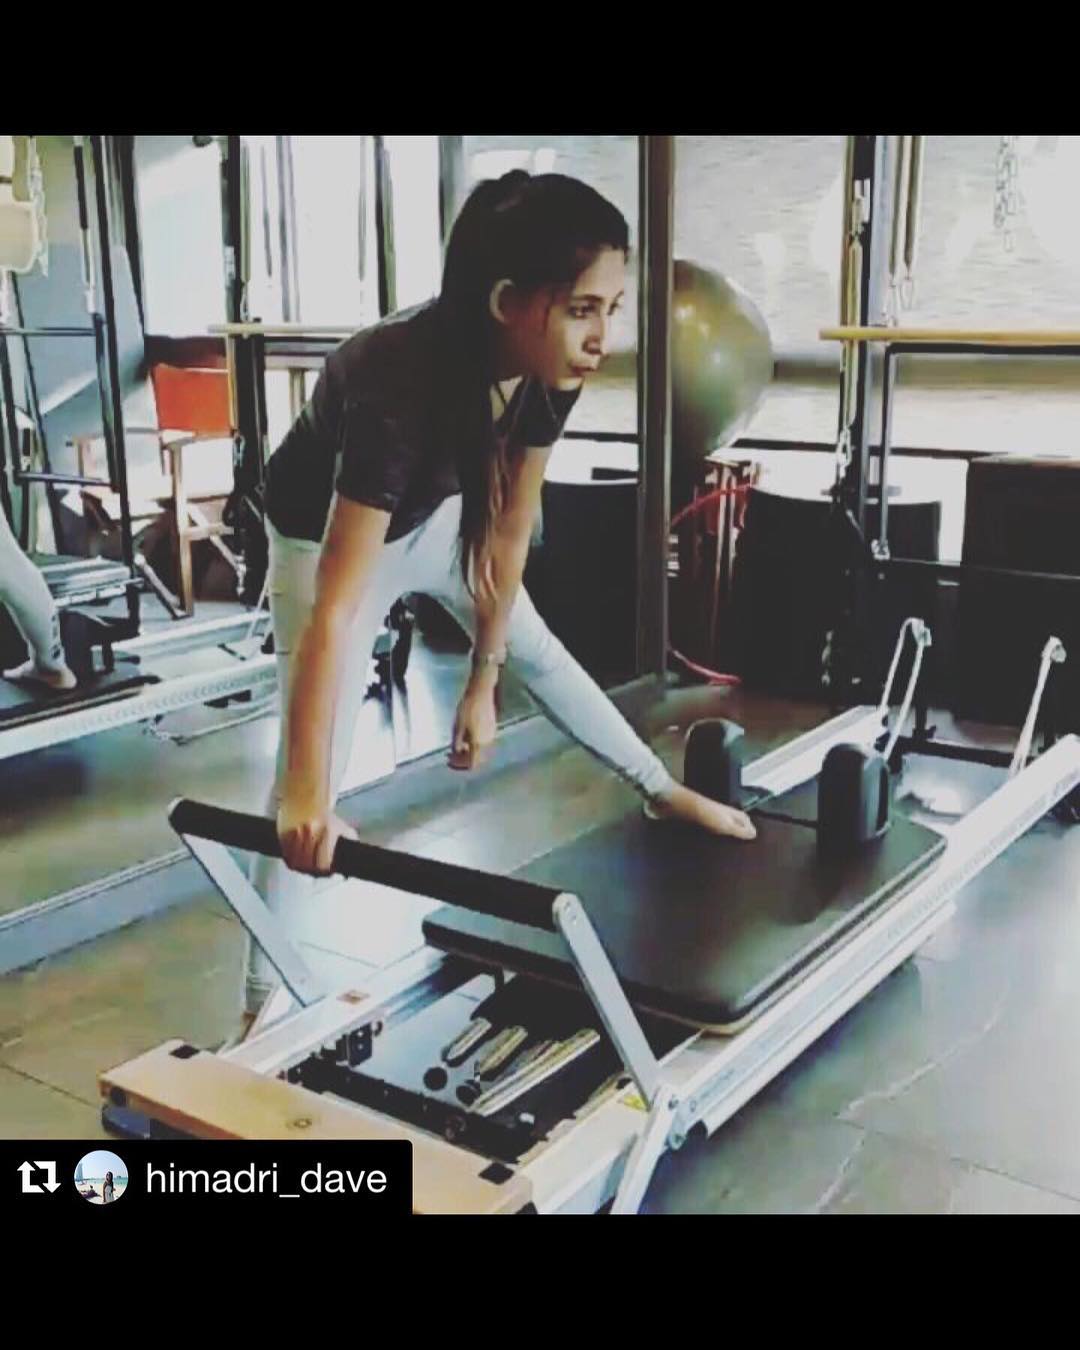 The Pilates Studio,  ClientDiaries:, Repost, Pilates, ThePilatesStudio, strength, flexibility, mind, body, soul, workout, FitnessEnthusiast, Fitness, workout, fit, FitnessStudio, Fitspo, Workout, WorkoutMotivation, fitness, pilatesgirl, pilatesbody, thepilatesstudioahemdabad, gettingbettereachday, fitnessforever